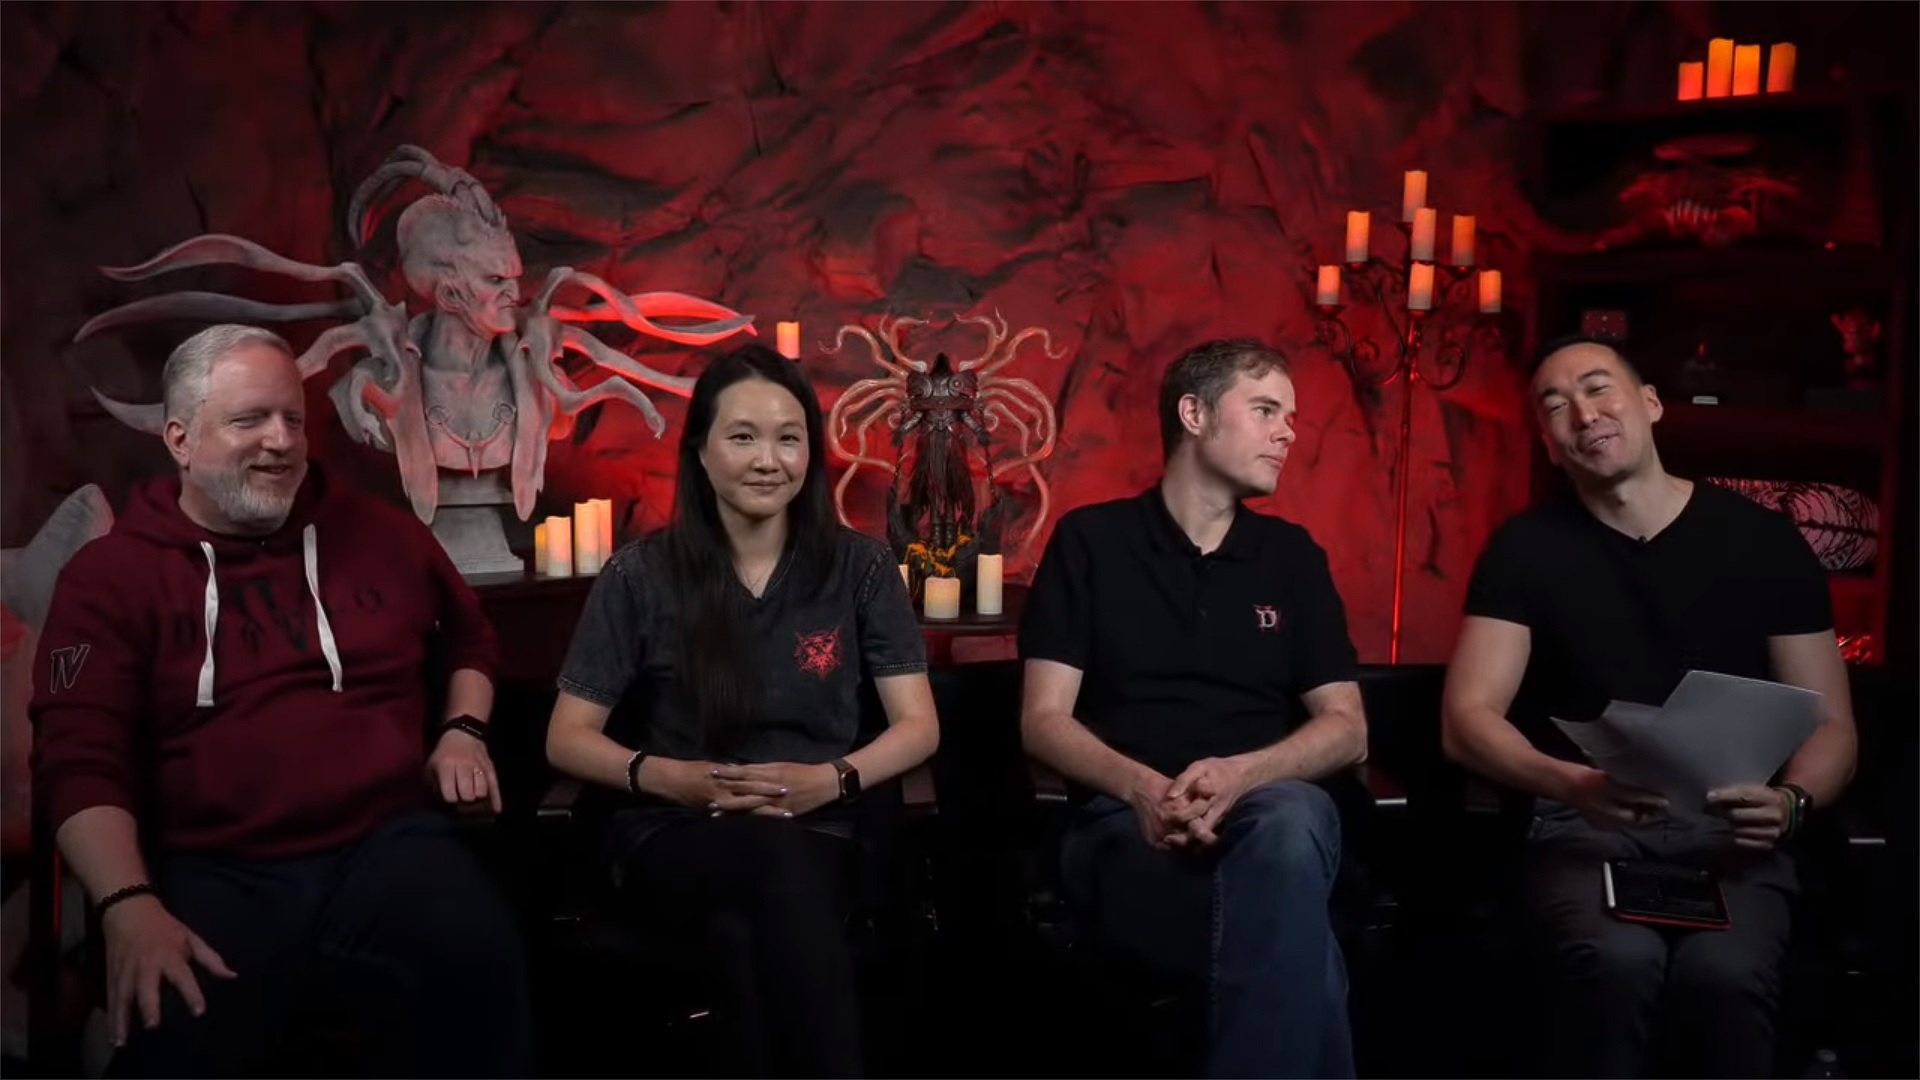 Diablo 4 devs surprised you all want to grind to max level